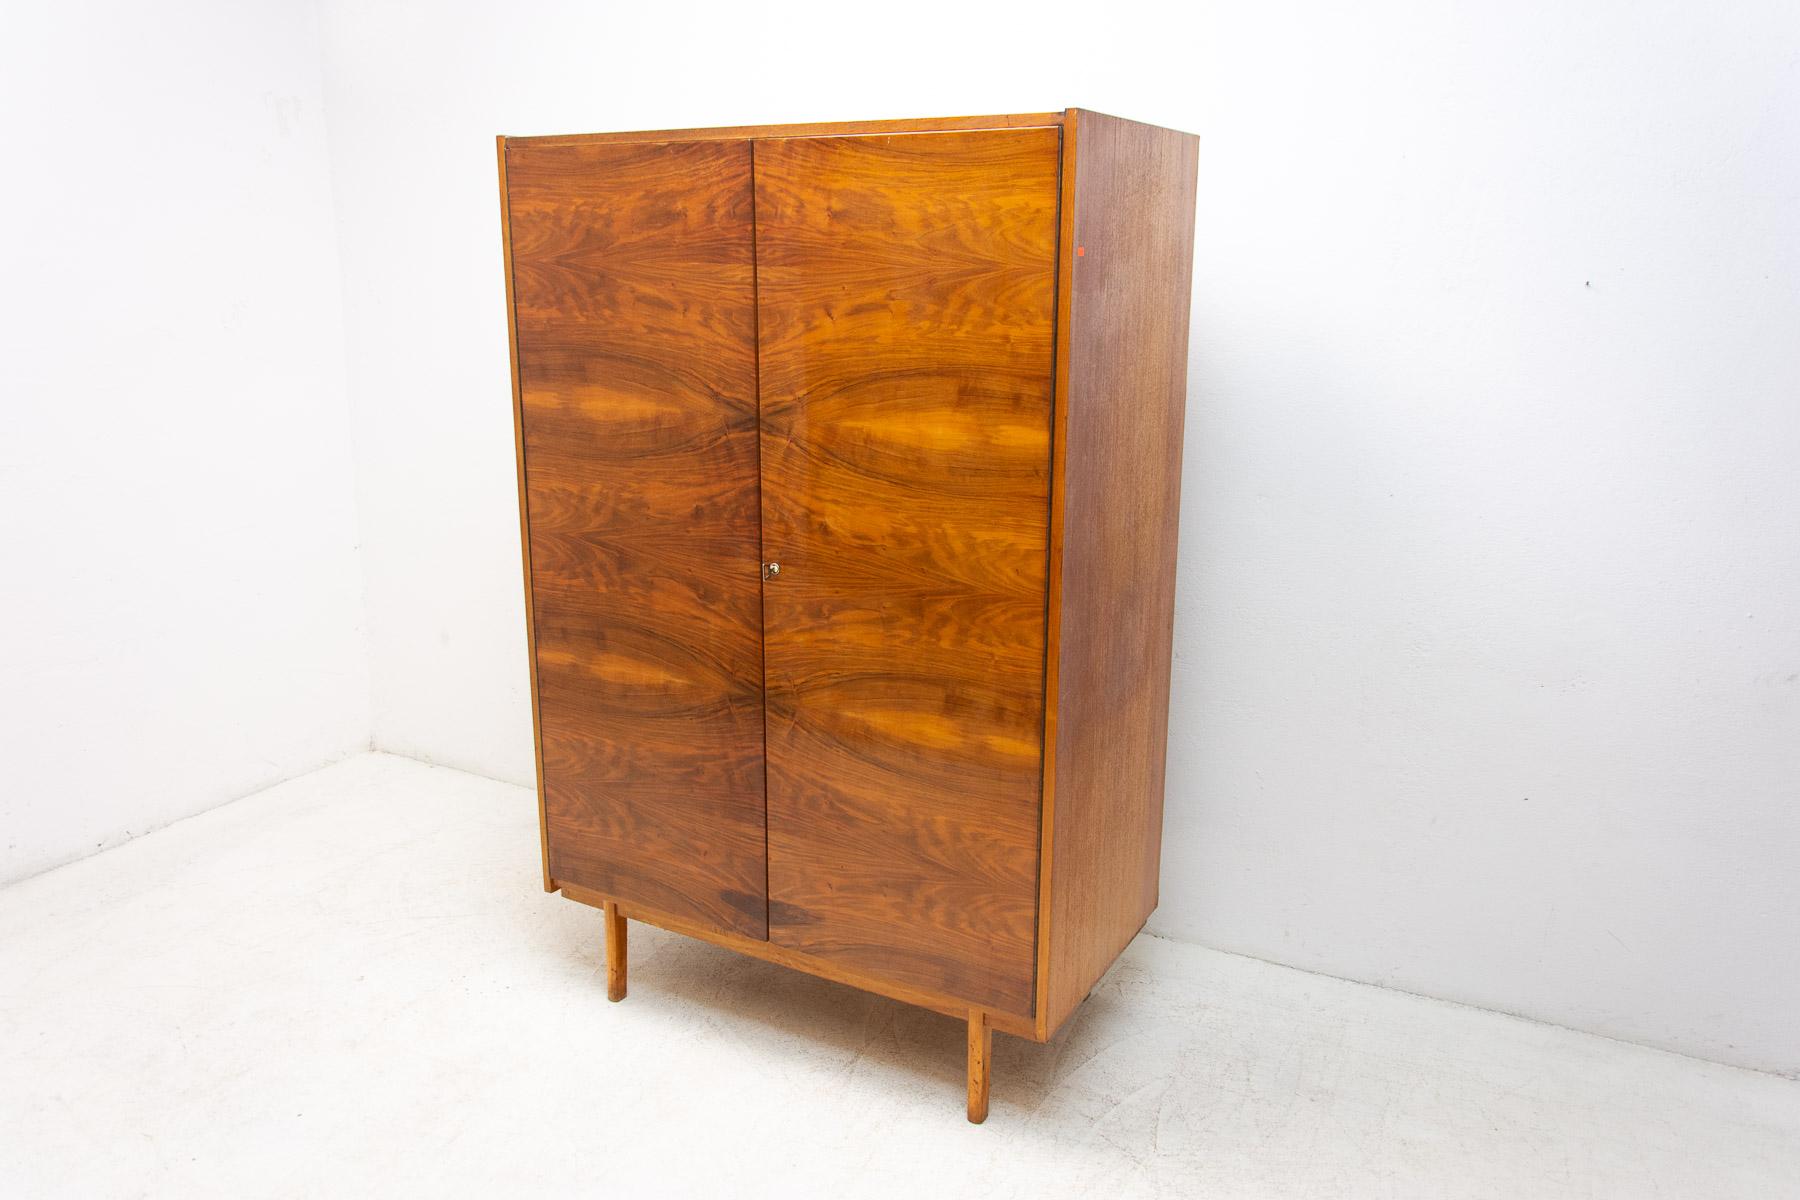 Vintage midcentury wardrobe from the 1960s.

Made in the former Czechoslovakia. Made of walnut wood and plywood.

In good Vintage condition, showing signs of age and using(minor fading on the sides).

 

Measures: Height: 175 cm

Lenght: